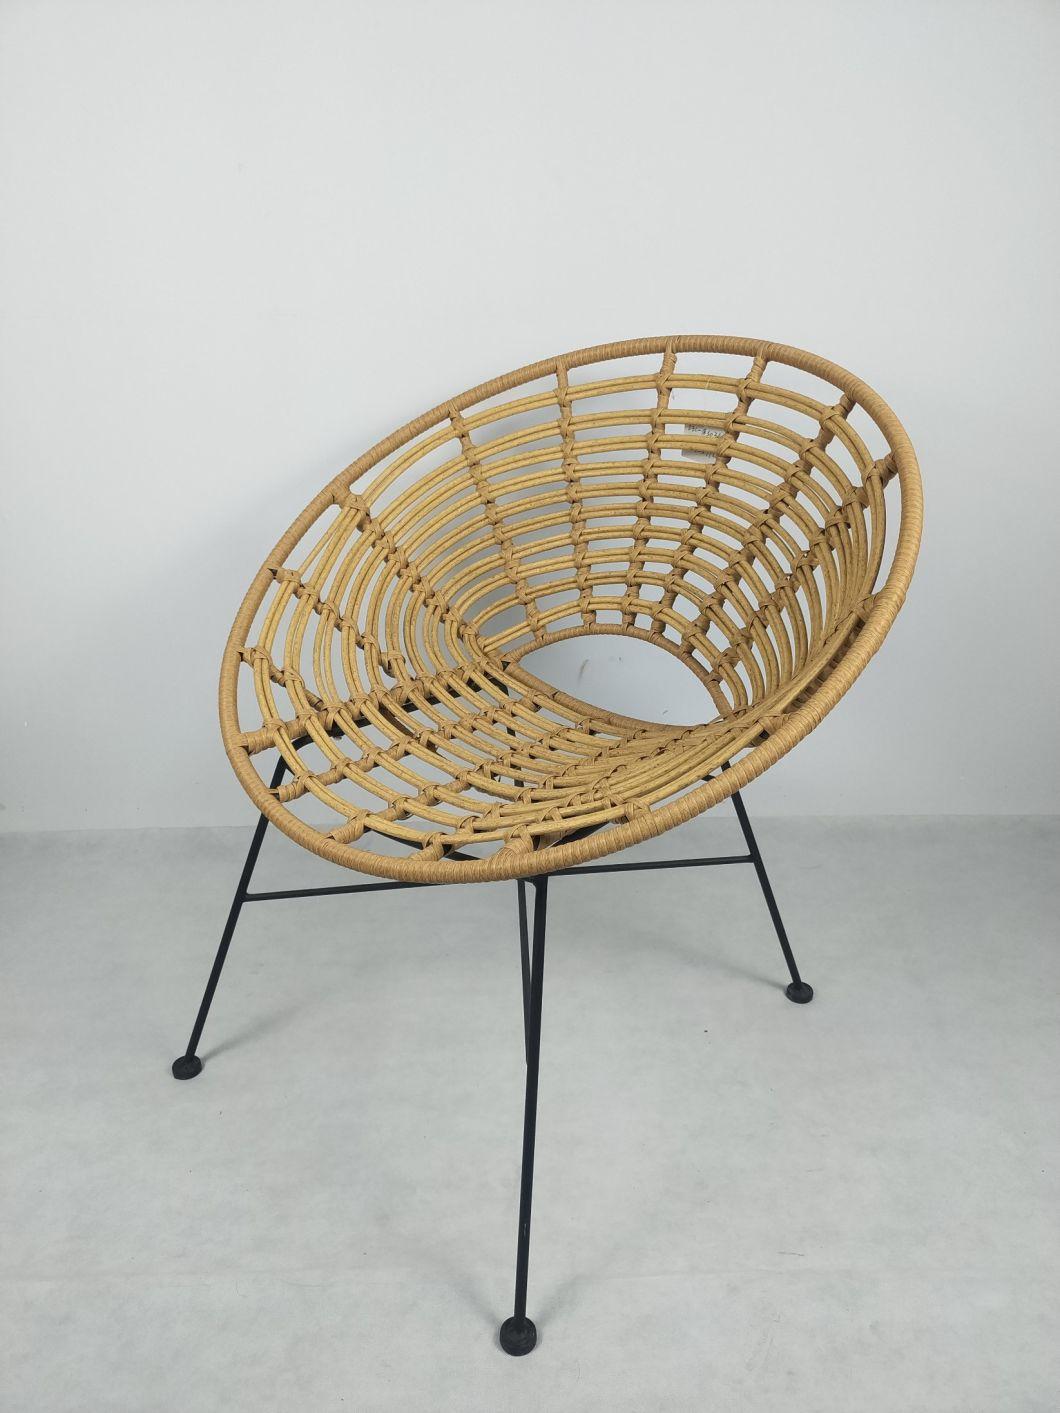 Synthetic Rattan PE Round Wood Wicker Woven Chairs Leisure Furniture